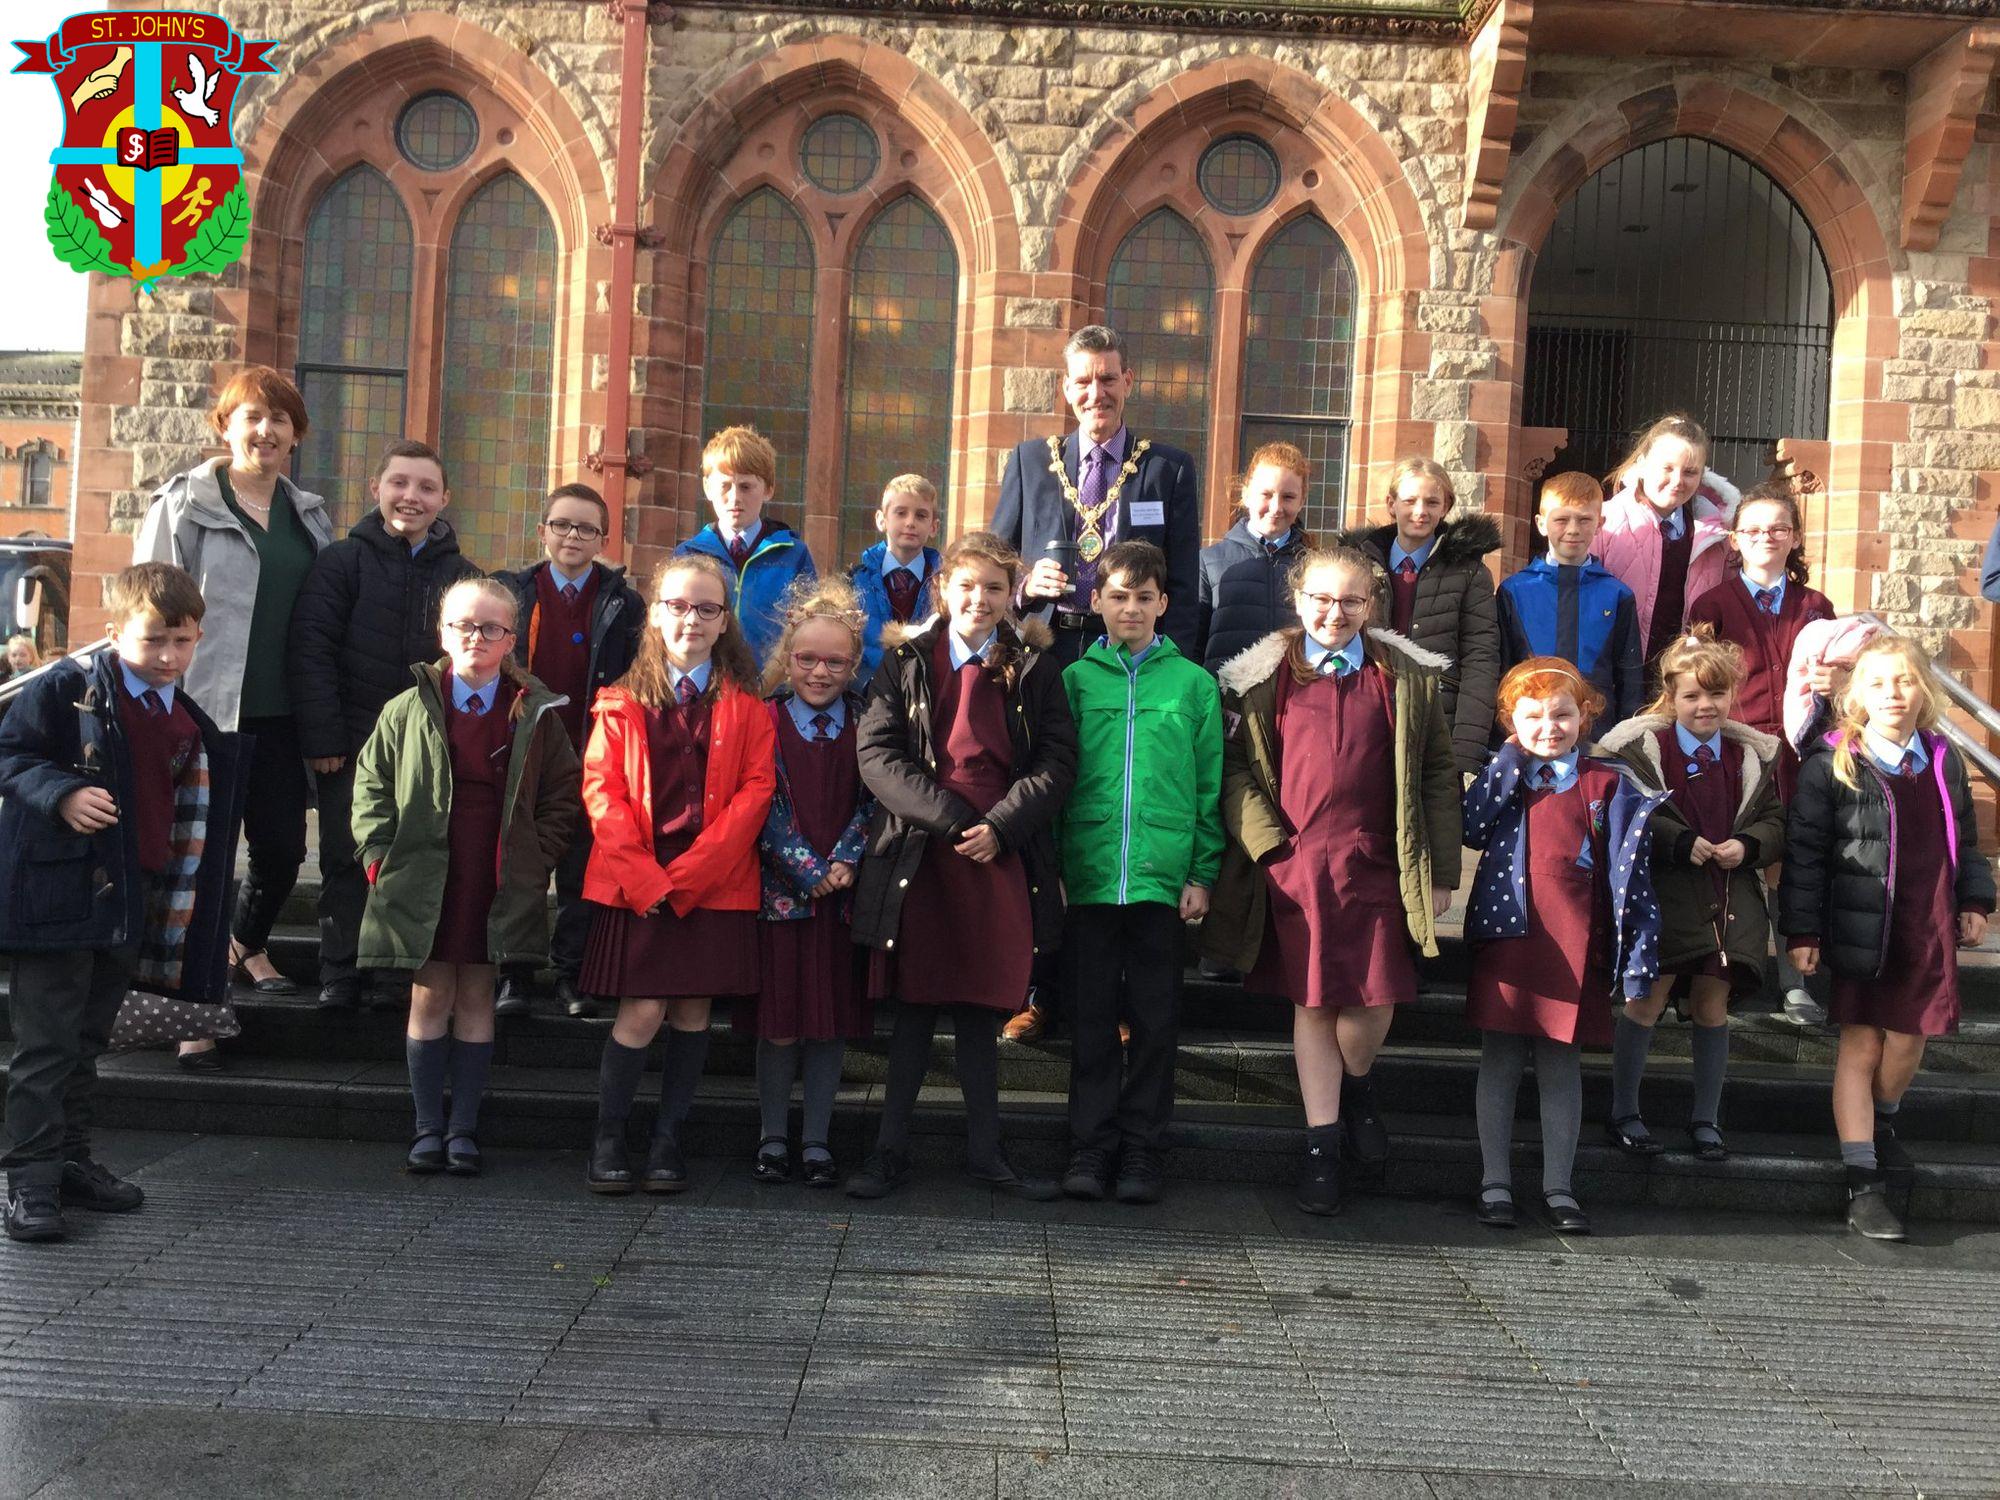 St John’s school council and shared school council went to the Guildhall